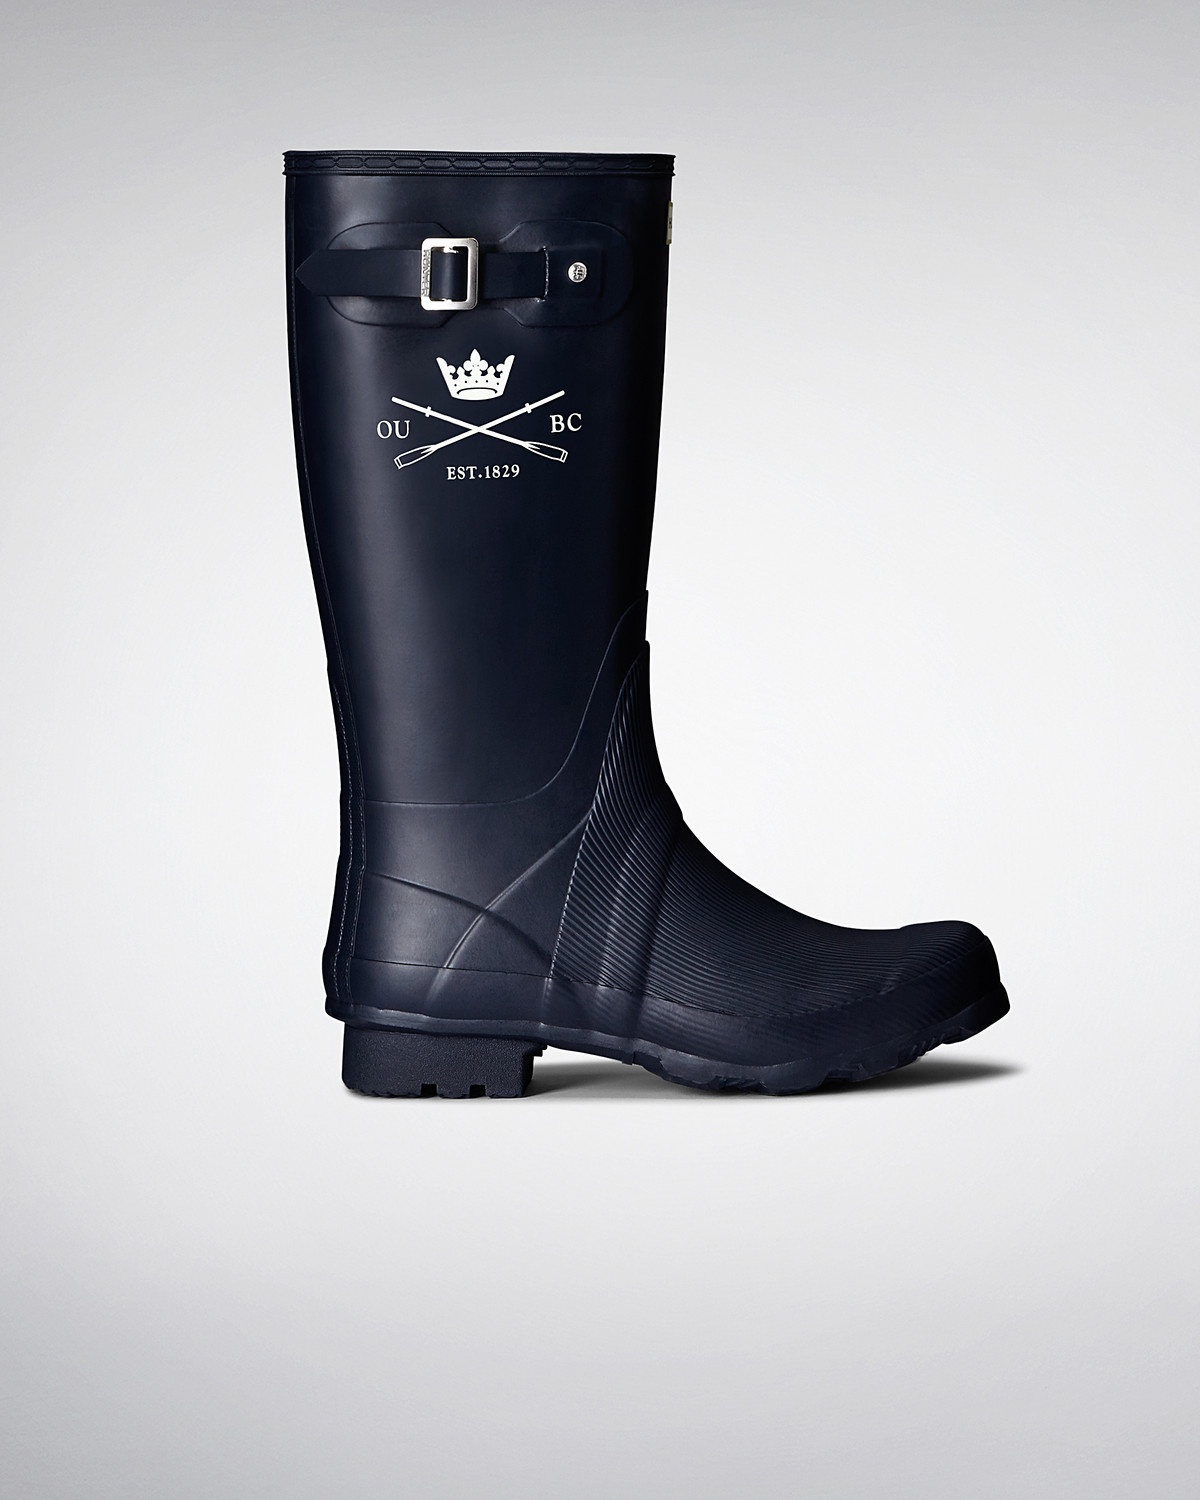 The Official Men's Oxford Boat Race Boots